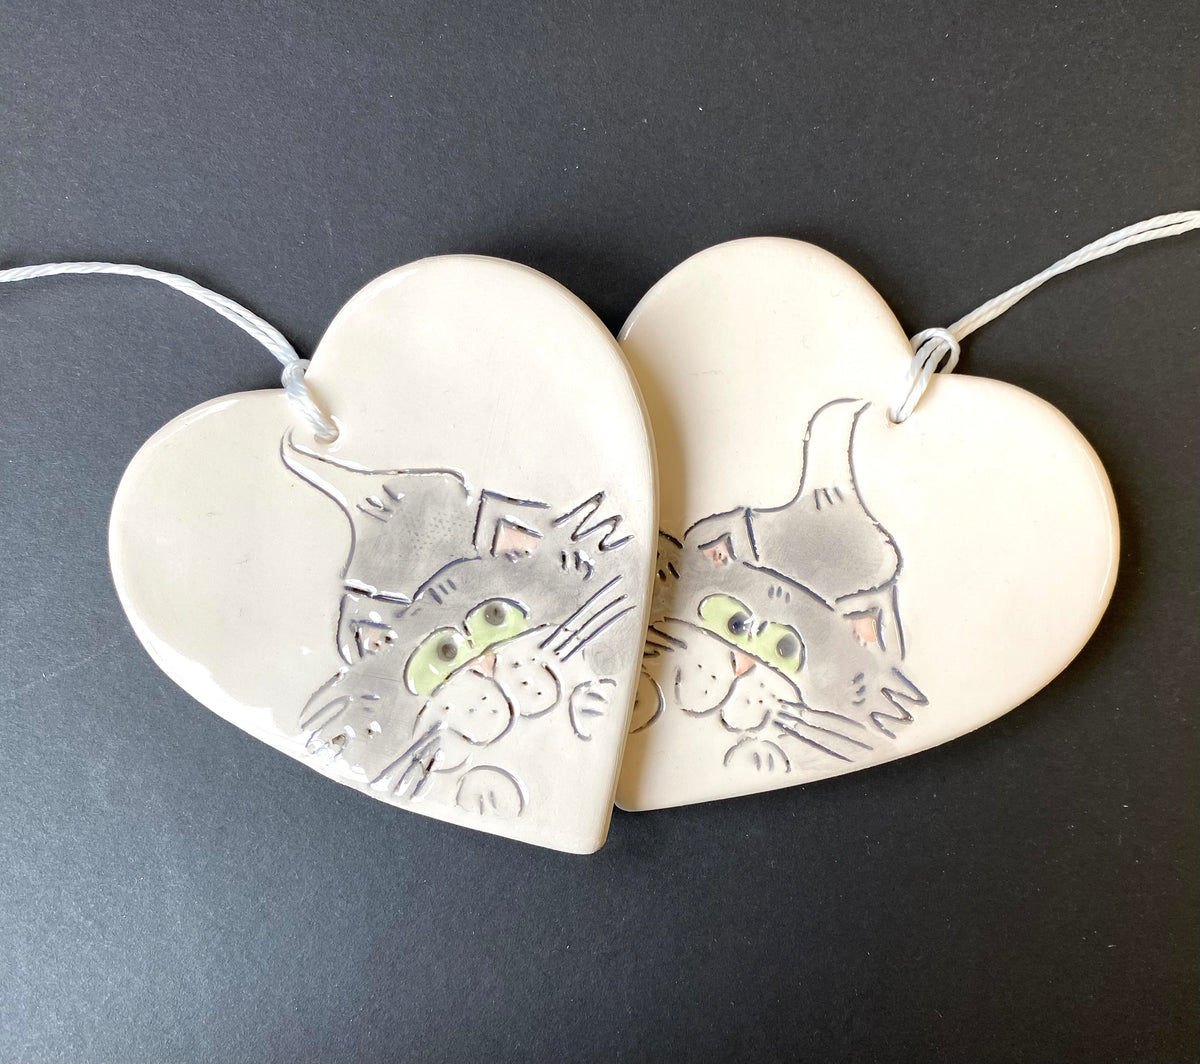 Small ceramic heart hanging with Cat design by Stephanie Beasley